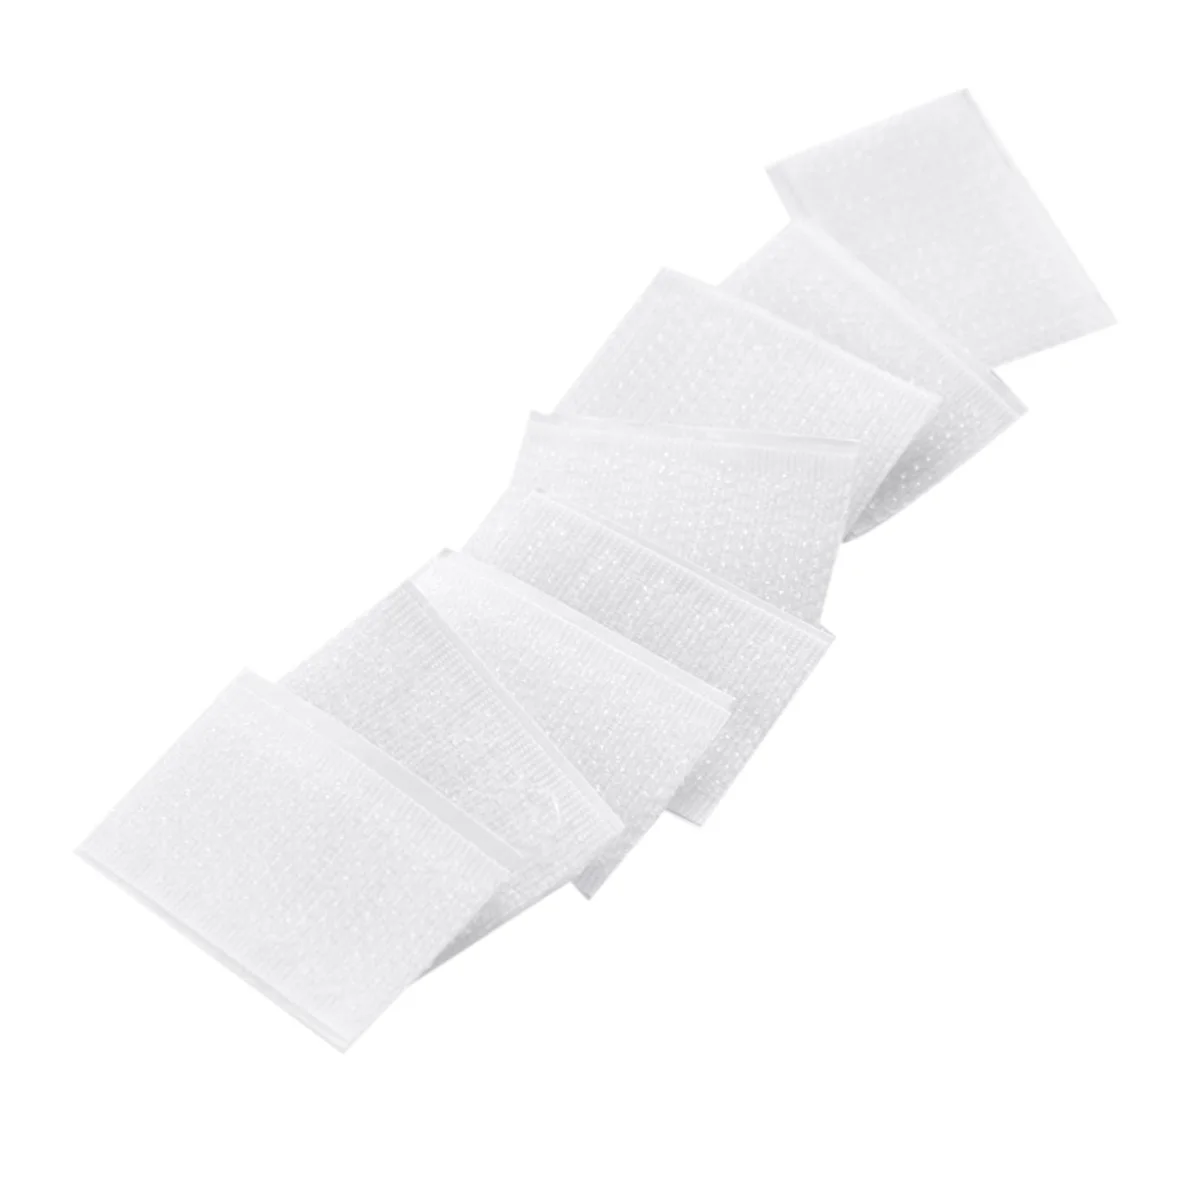 S Oil-absorbing Paper Filter Membranes Range Hoods Kitchen Anti-smoke Stickers Filter Screens Oil Cover